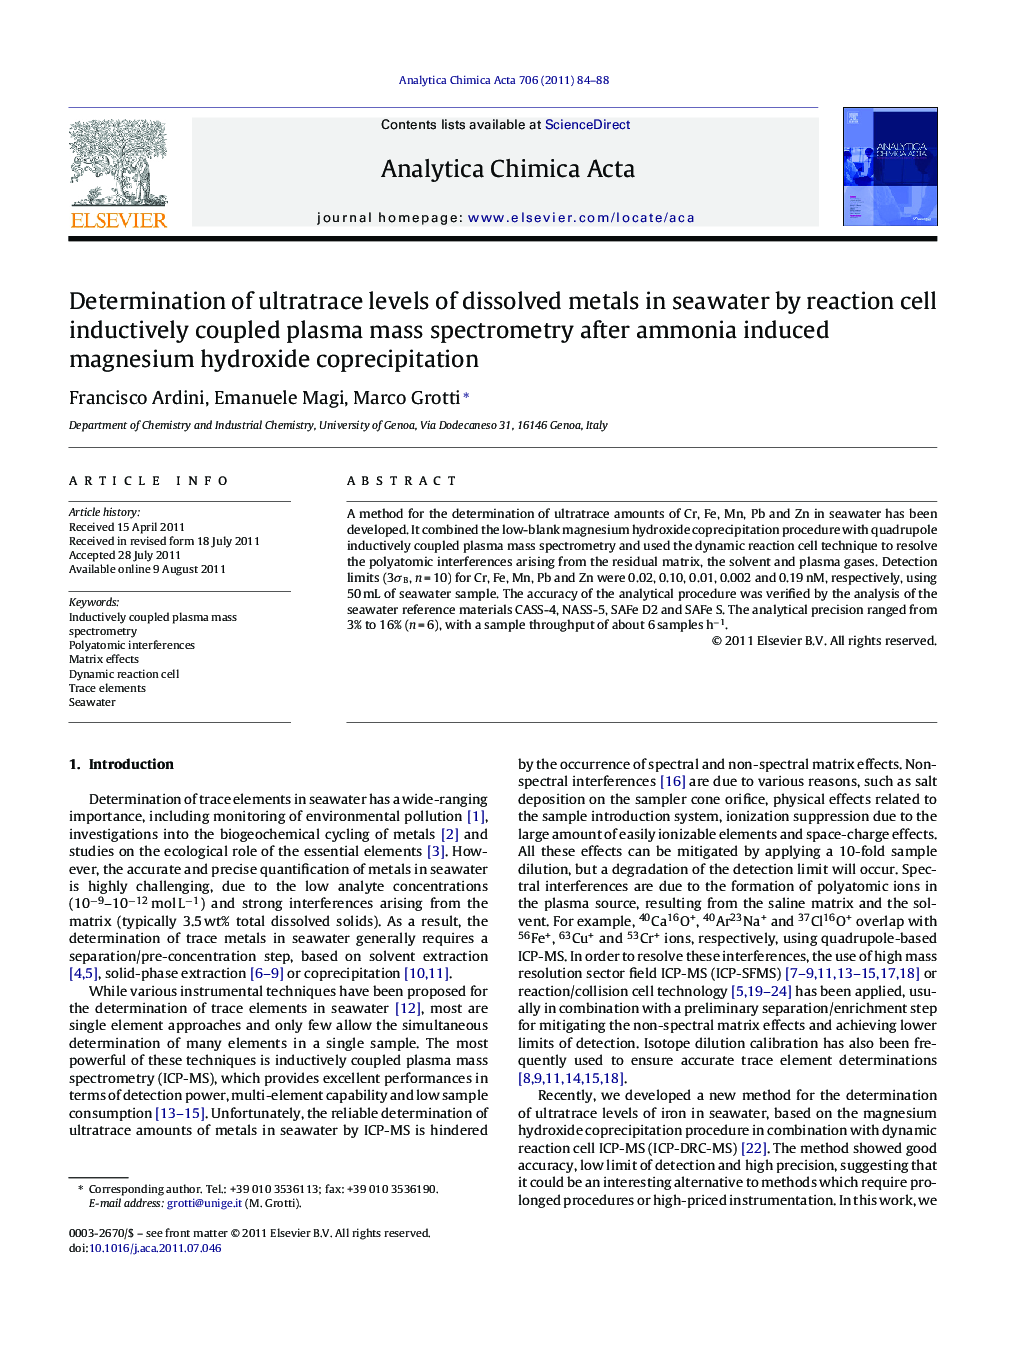 Determination of ultratrace levels of dissolved metals in seawater by reaction cell inductively coupled plasma mass spectrometry after ammonia induced magnesium hydroxide coprecipitation